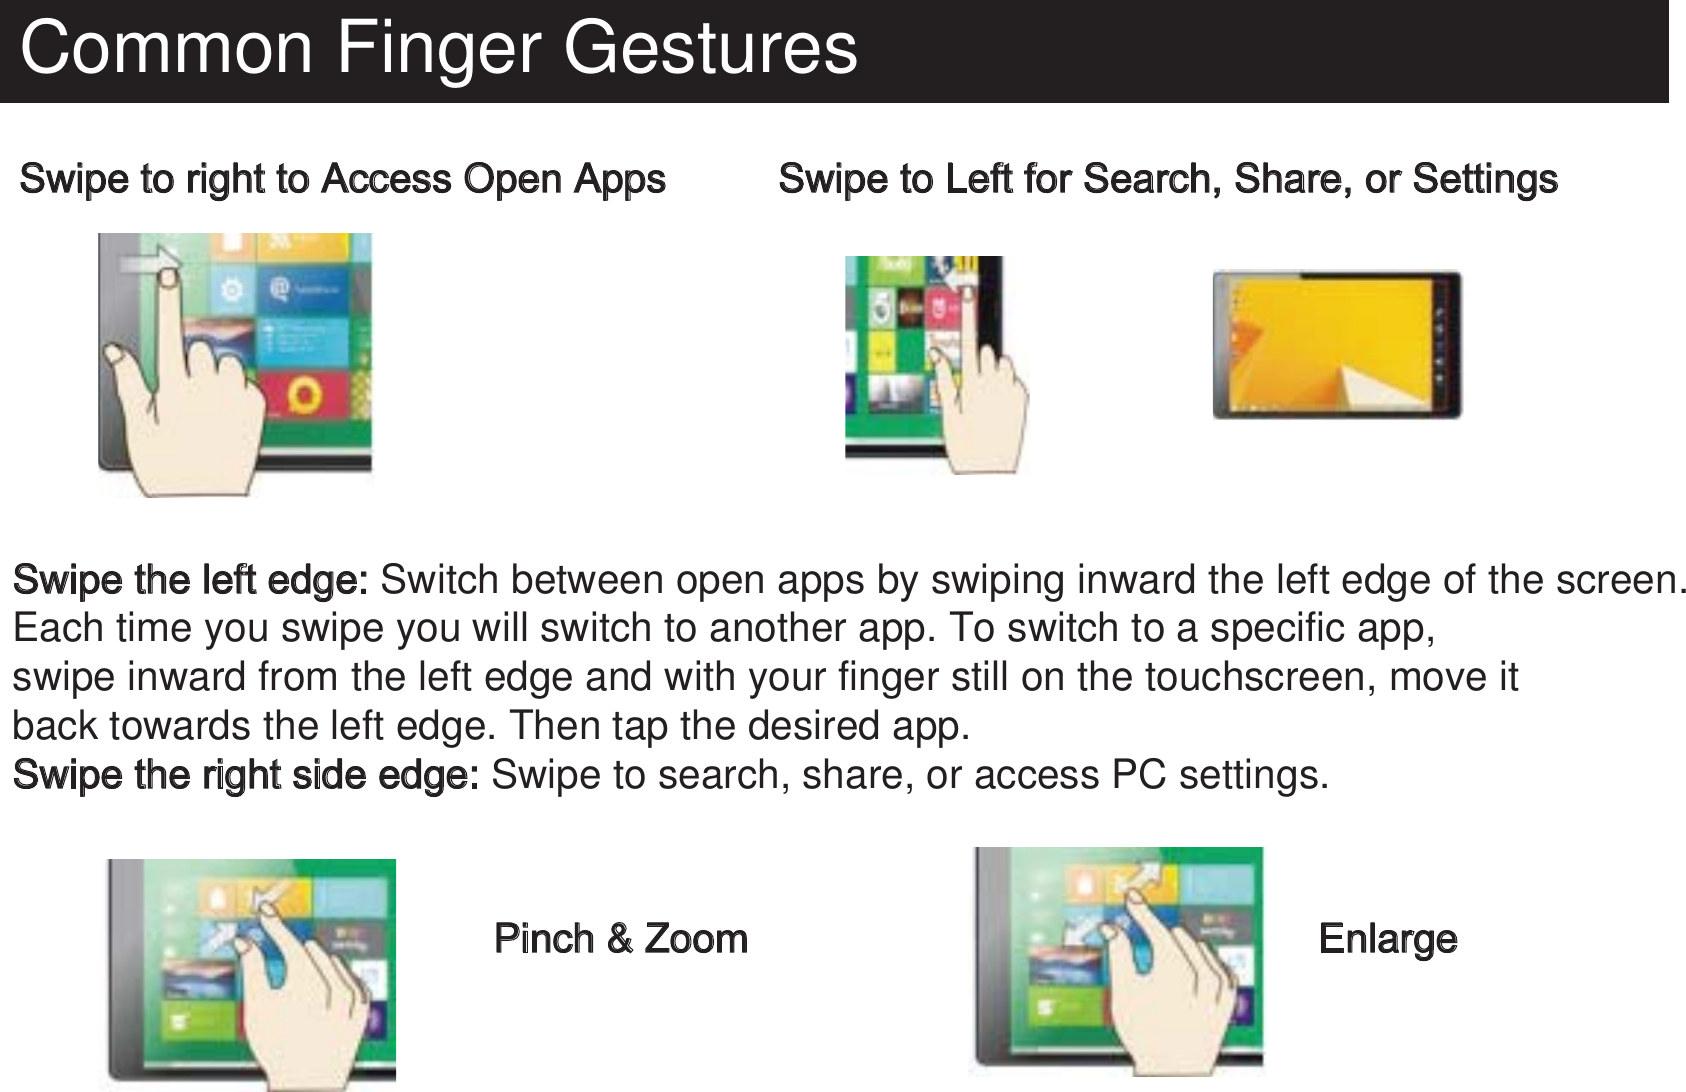 Common Finger GesturesSwipe to right to Access Open AppsSwipe the left edge: Switch between open apps by swiping inward the left edge of the screen. Each time you swipe you will switch to another app. To switch to a specific app, swipe inward from the left edge and with your finger still on the touchscreen, move itback towards the left edge. Then tap the desired app.Swipe the right side edge: Swipe to search, share, or access PC settings.Swipe to Left for Search, Share, or SettingsPinch &amp; Zoom Enlarge